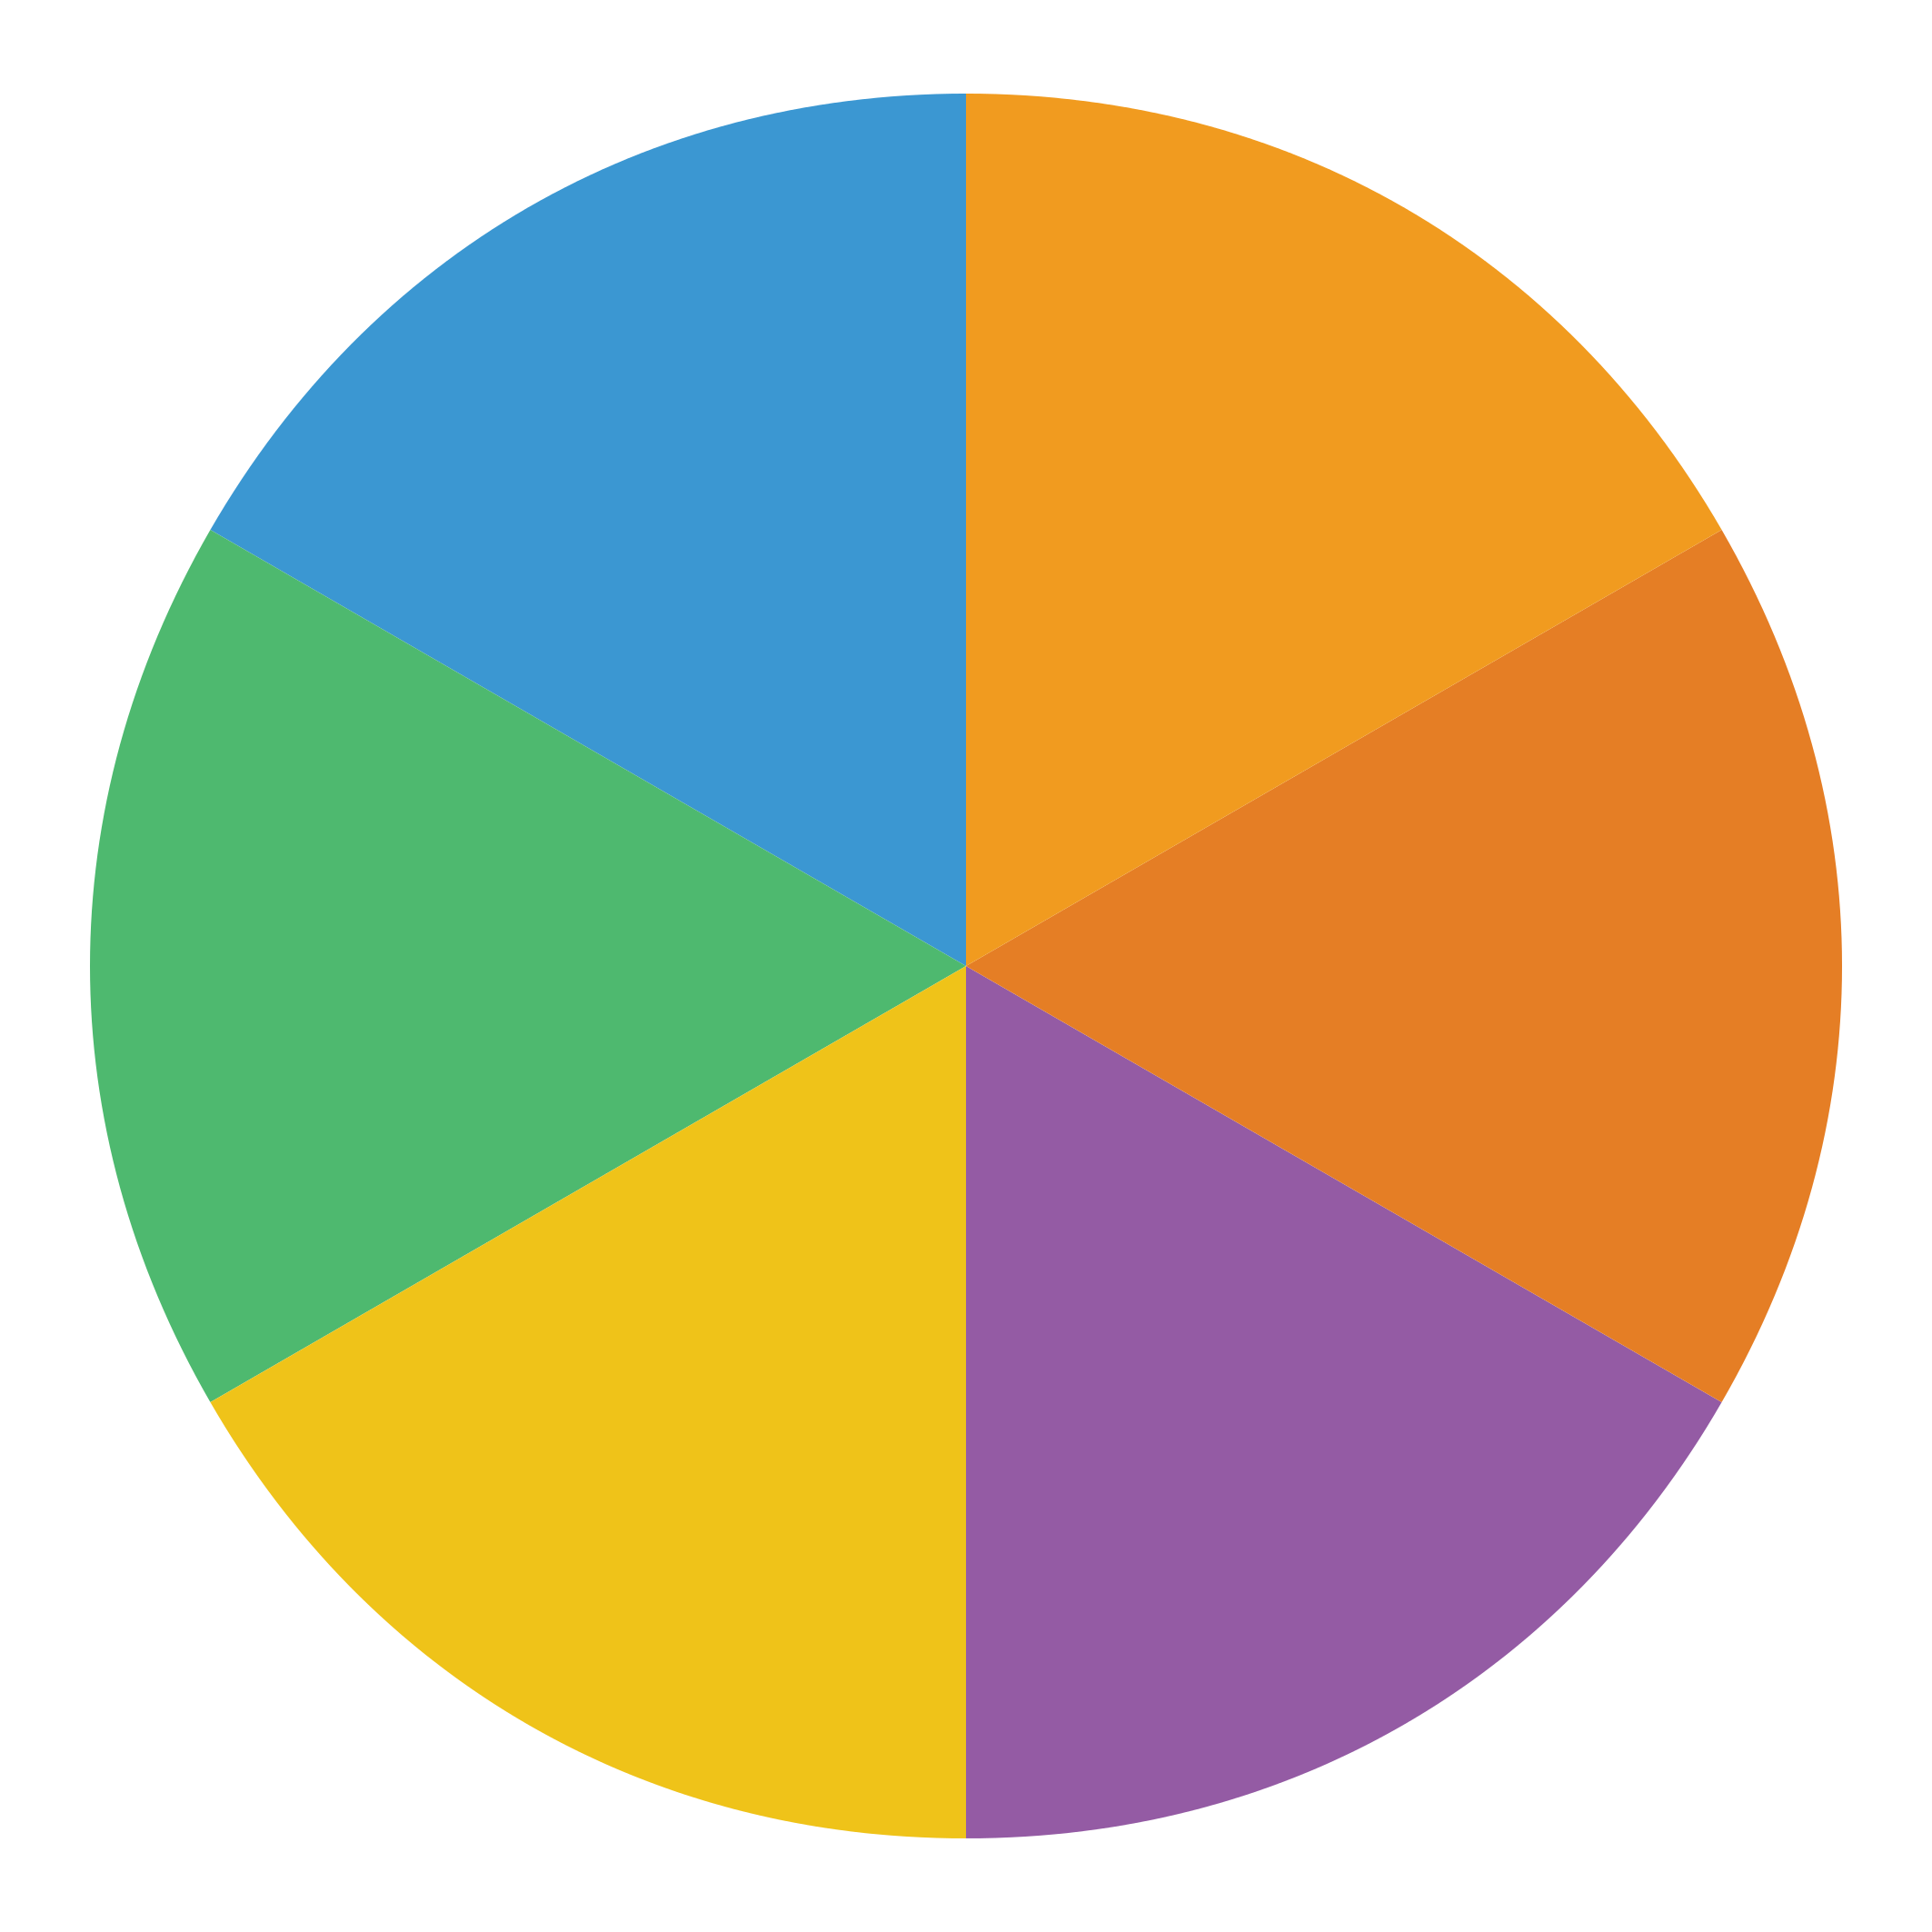 A Colorful Circle With Different Colors